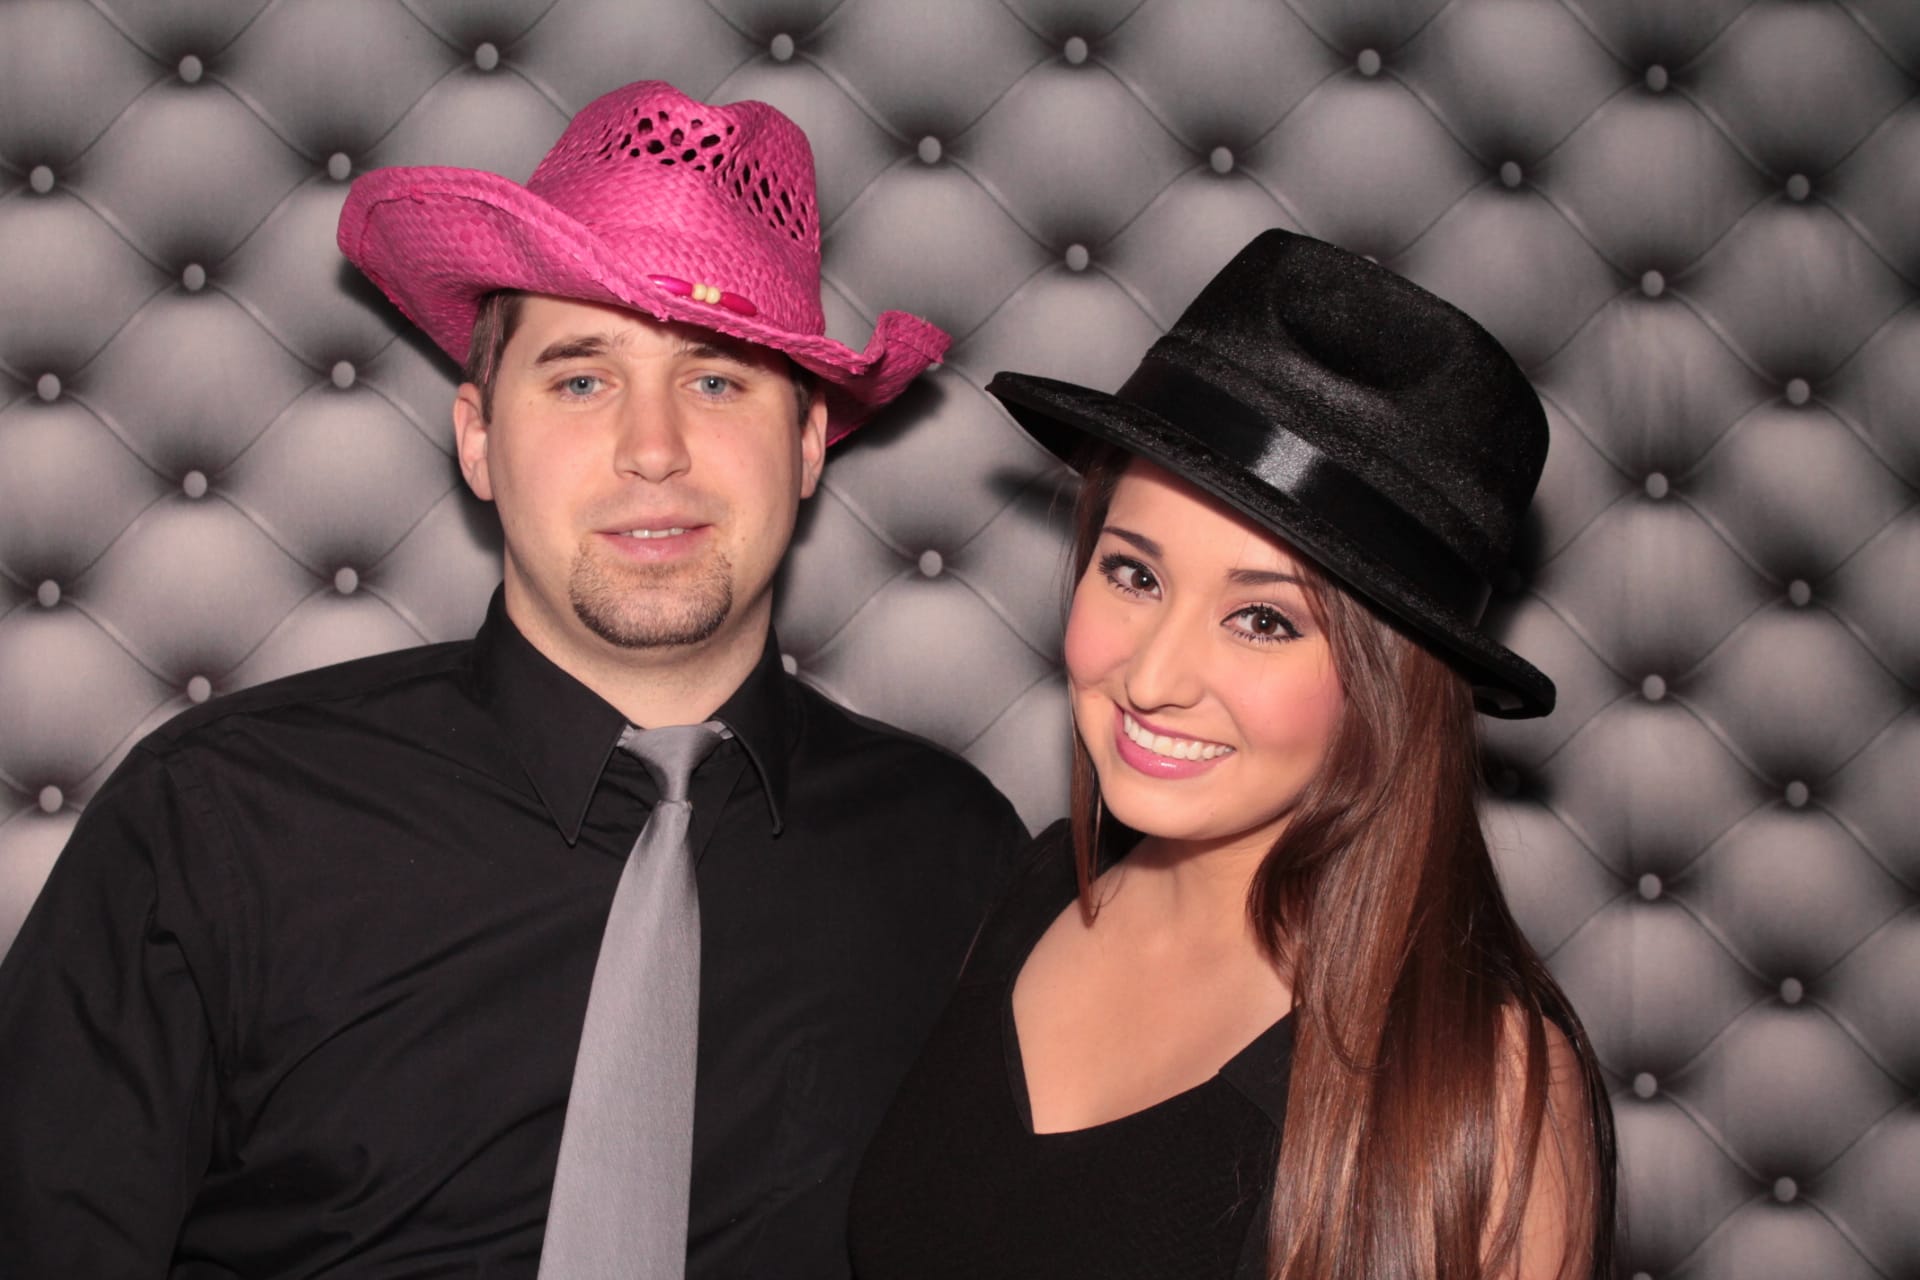 Photobooth-Rental-Austin-Company-Government-Moonshine-Party-Memories-No. 1-Props-Hats